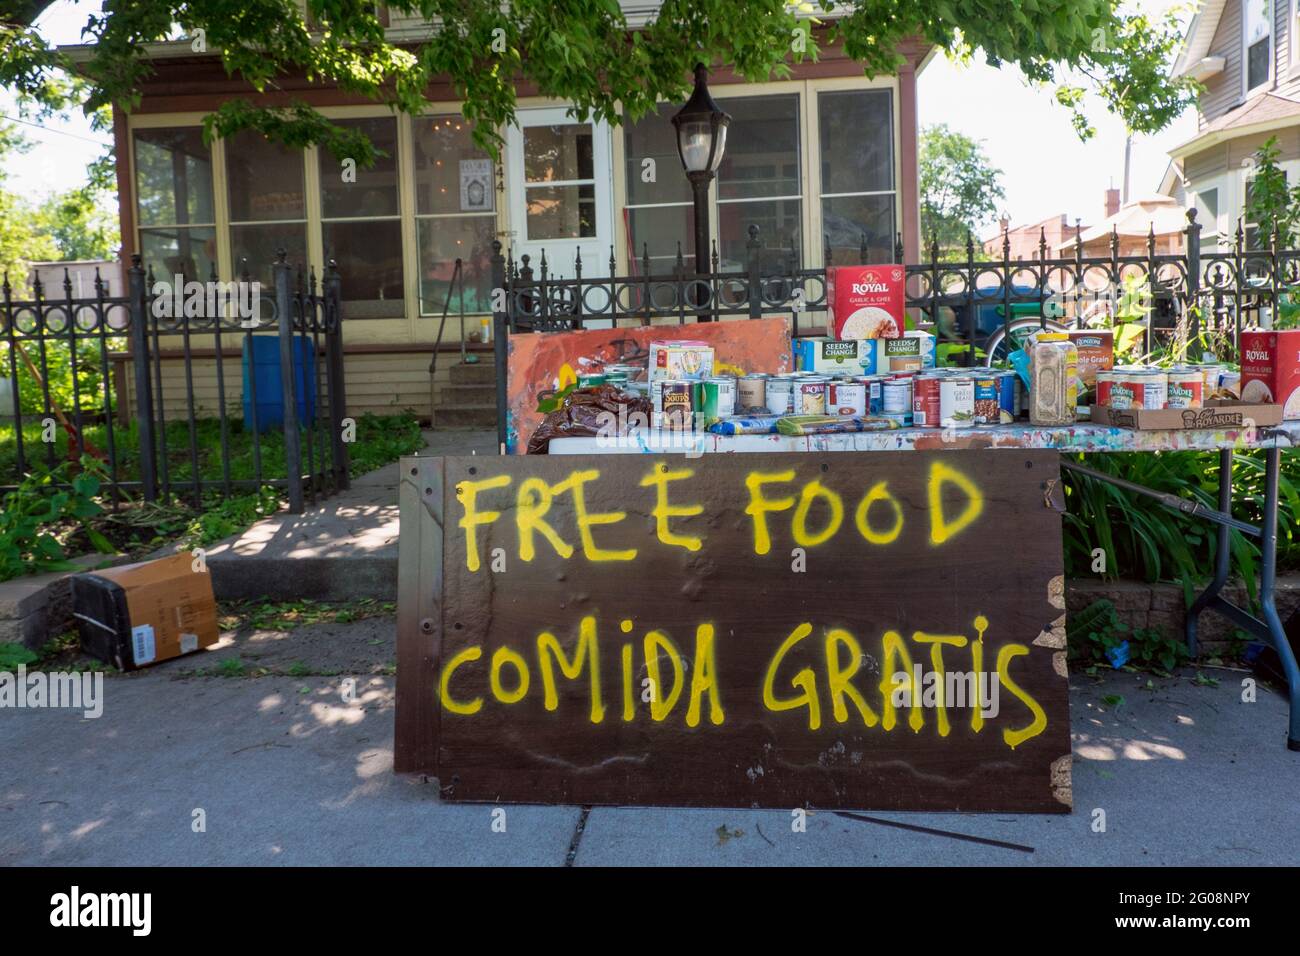 Free food on a table in a neighborhood, outdoor food bank Stock Photo